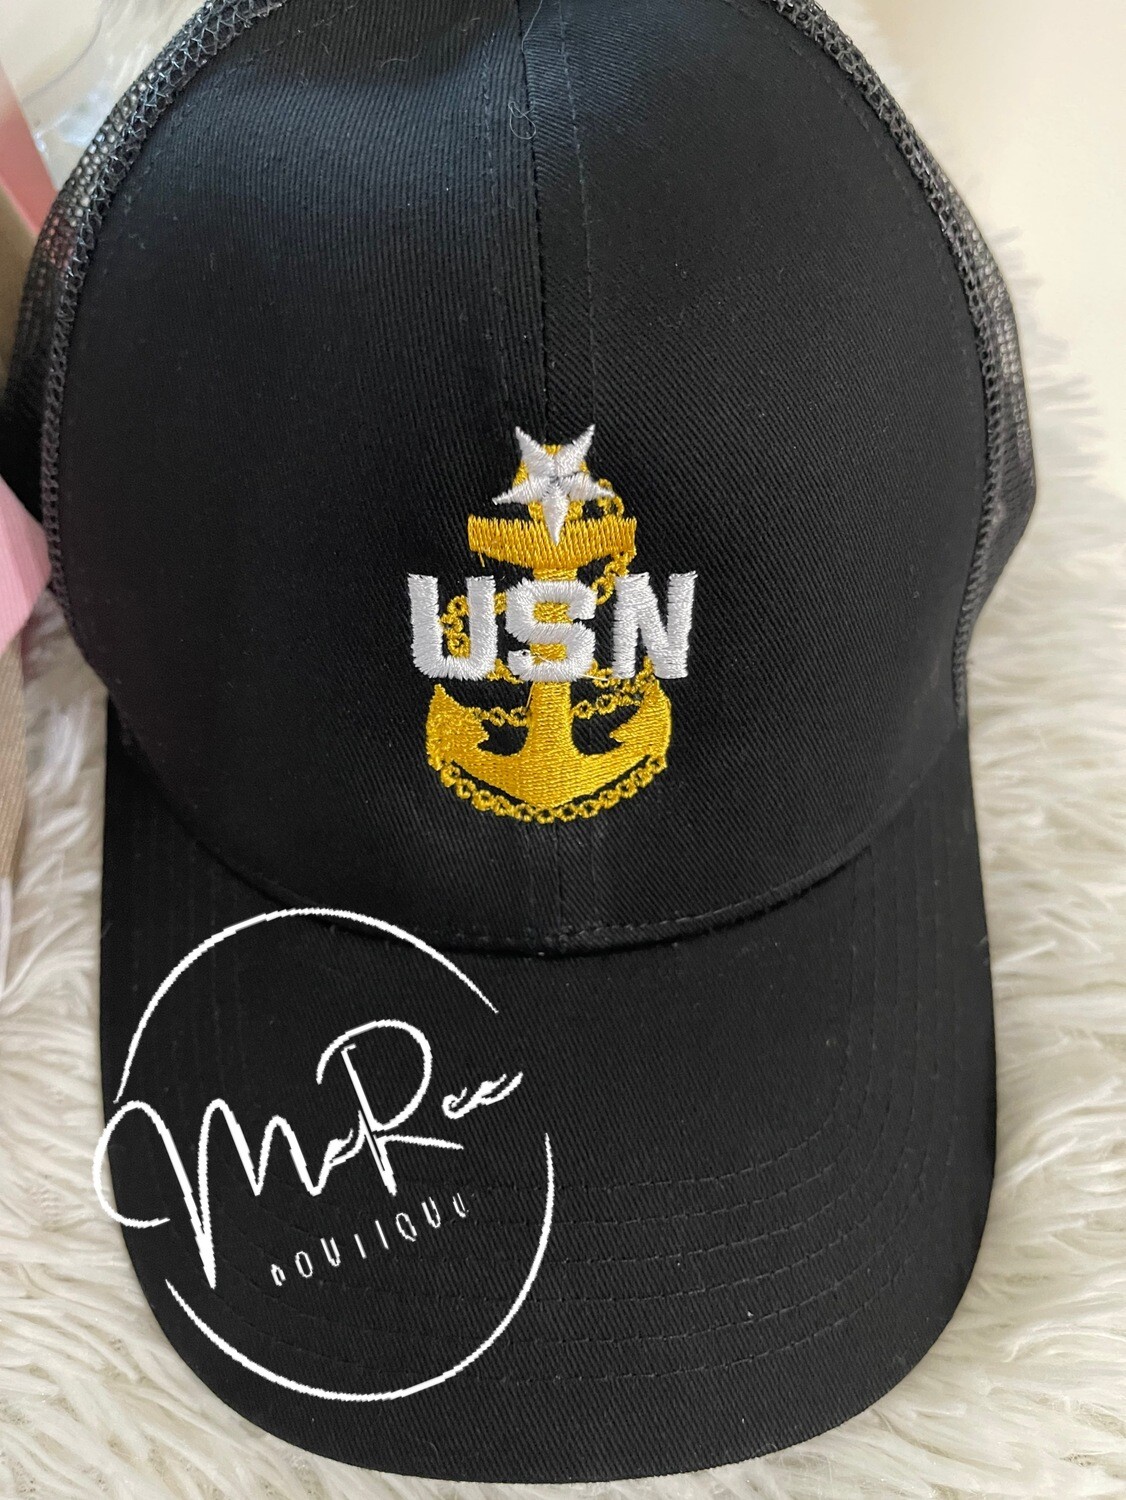 Black Embroidered ❤️Ponytail Hat Mesh Cap 🧢. Please allow 4-6 business days to ship once the order is placed. (USN and Stars, if applicable, are embroidered in white.)